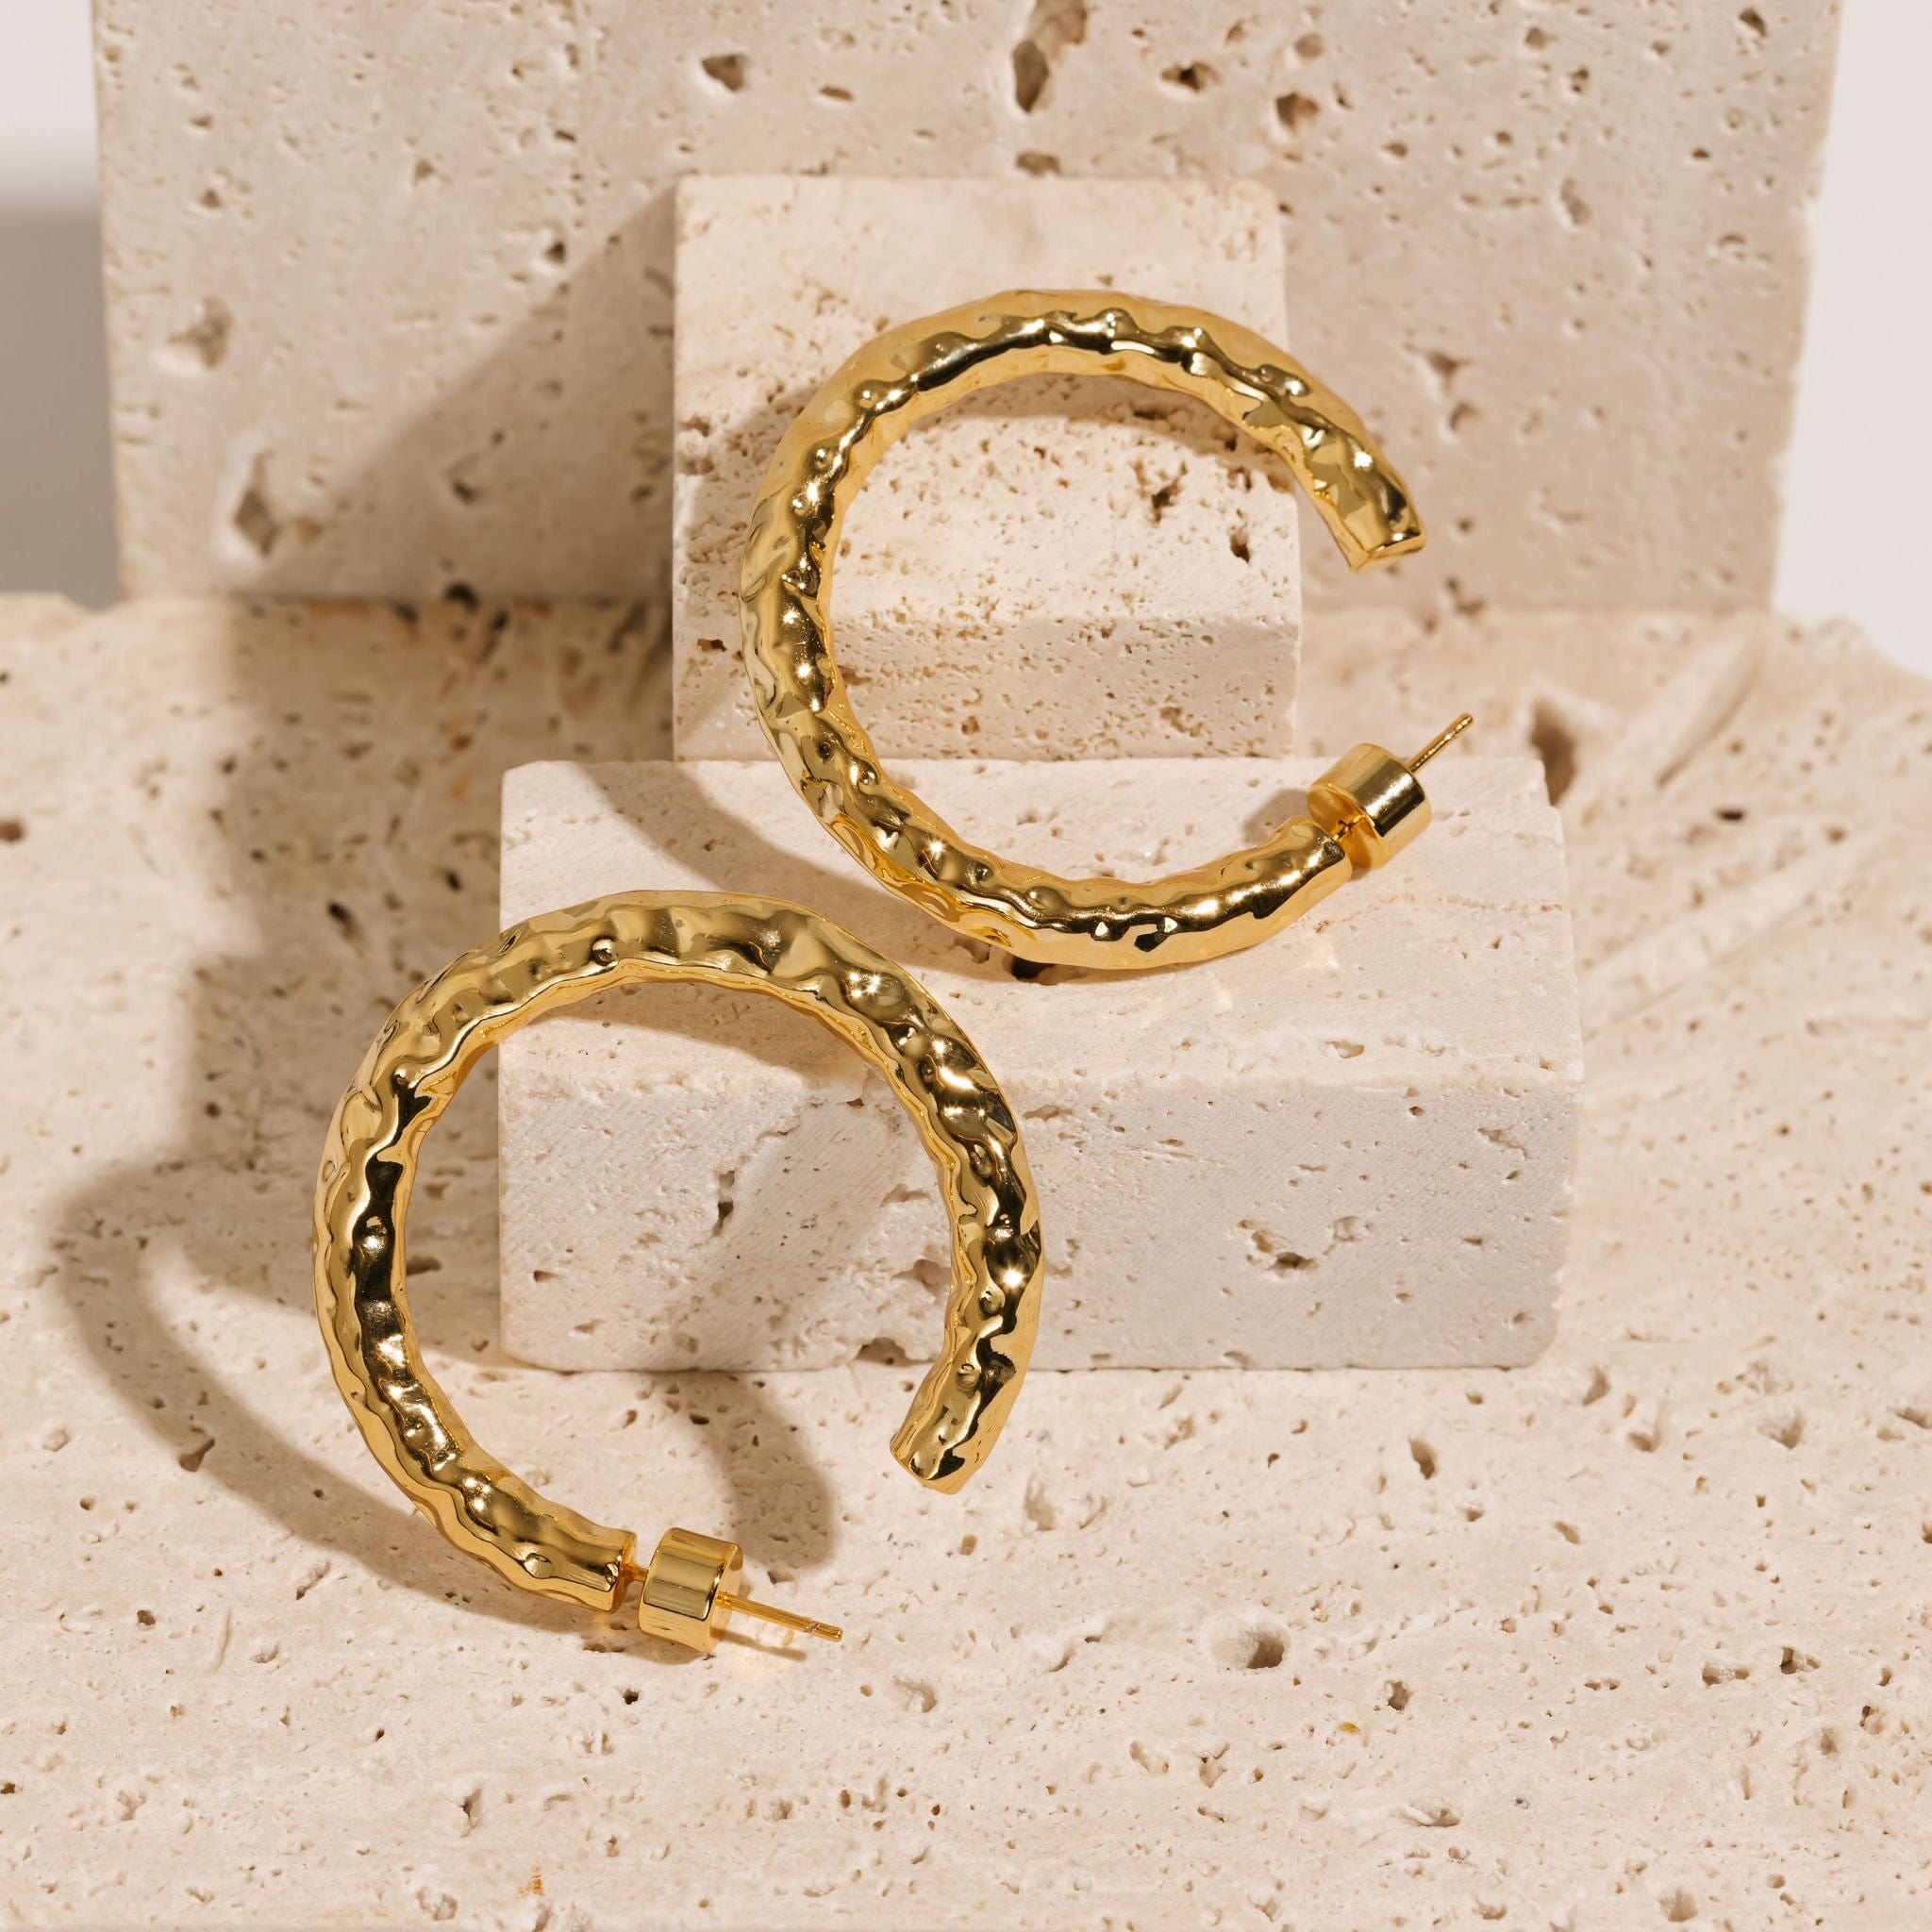  Two 40mm Marbella Hoop earrings are propped up and displayed side-by-side to show of their open-hoop shape and hammered texture.